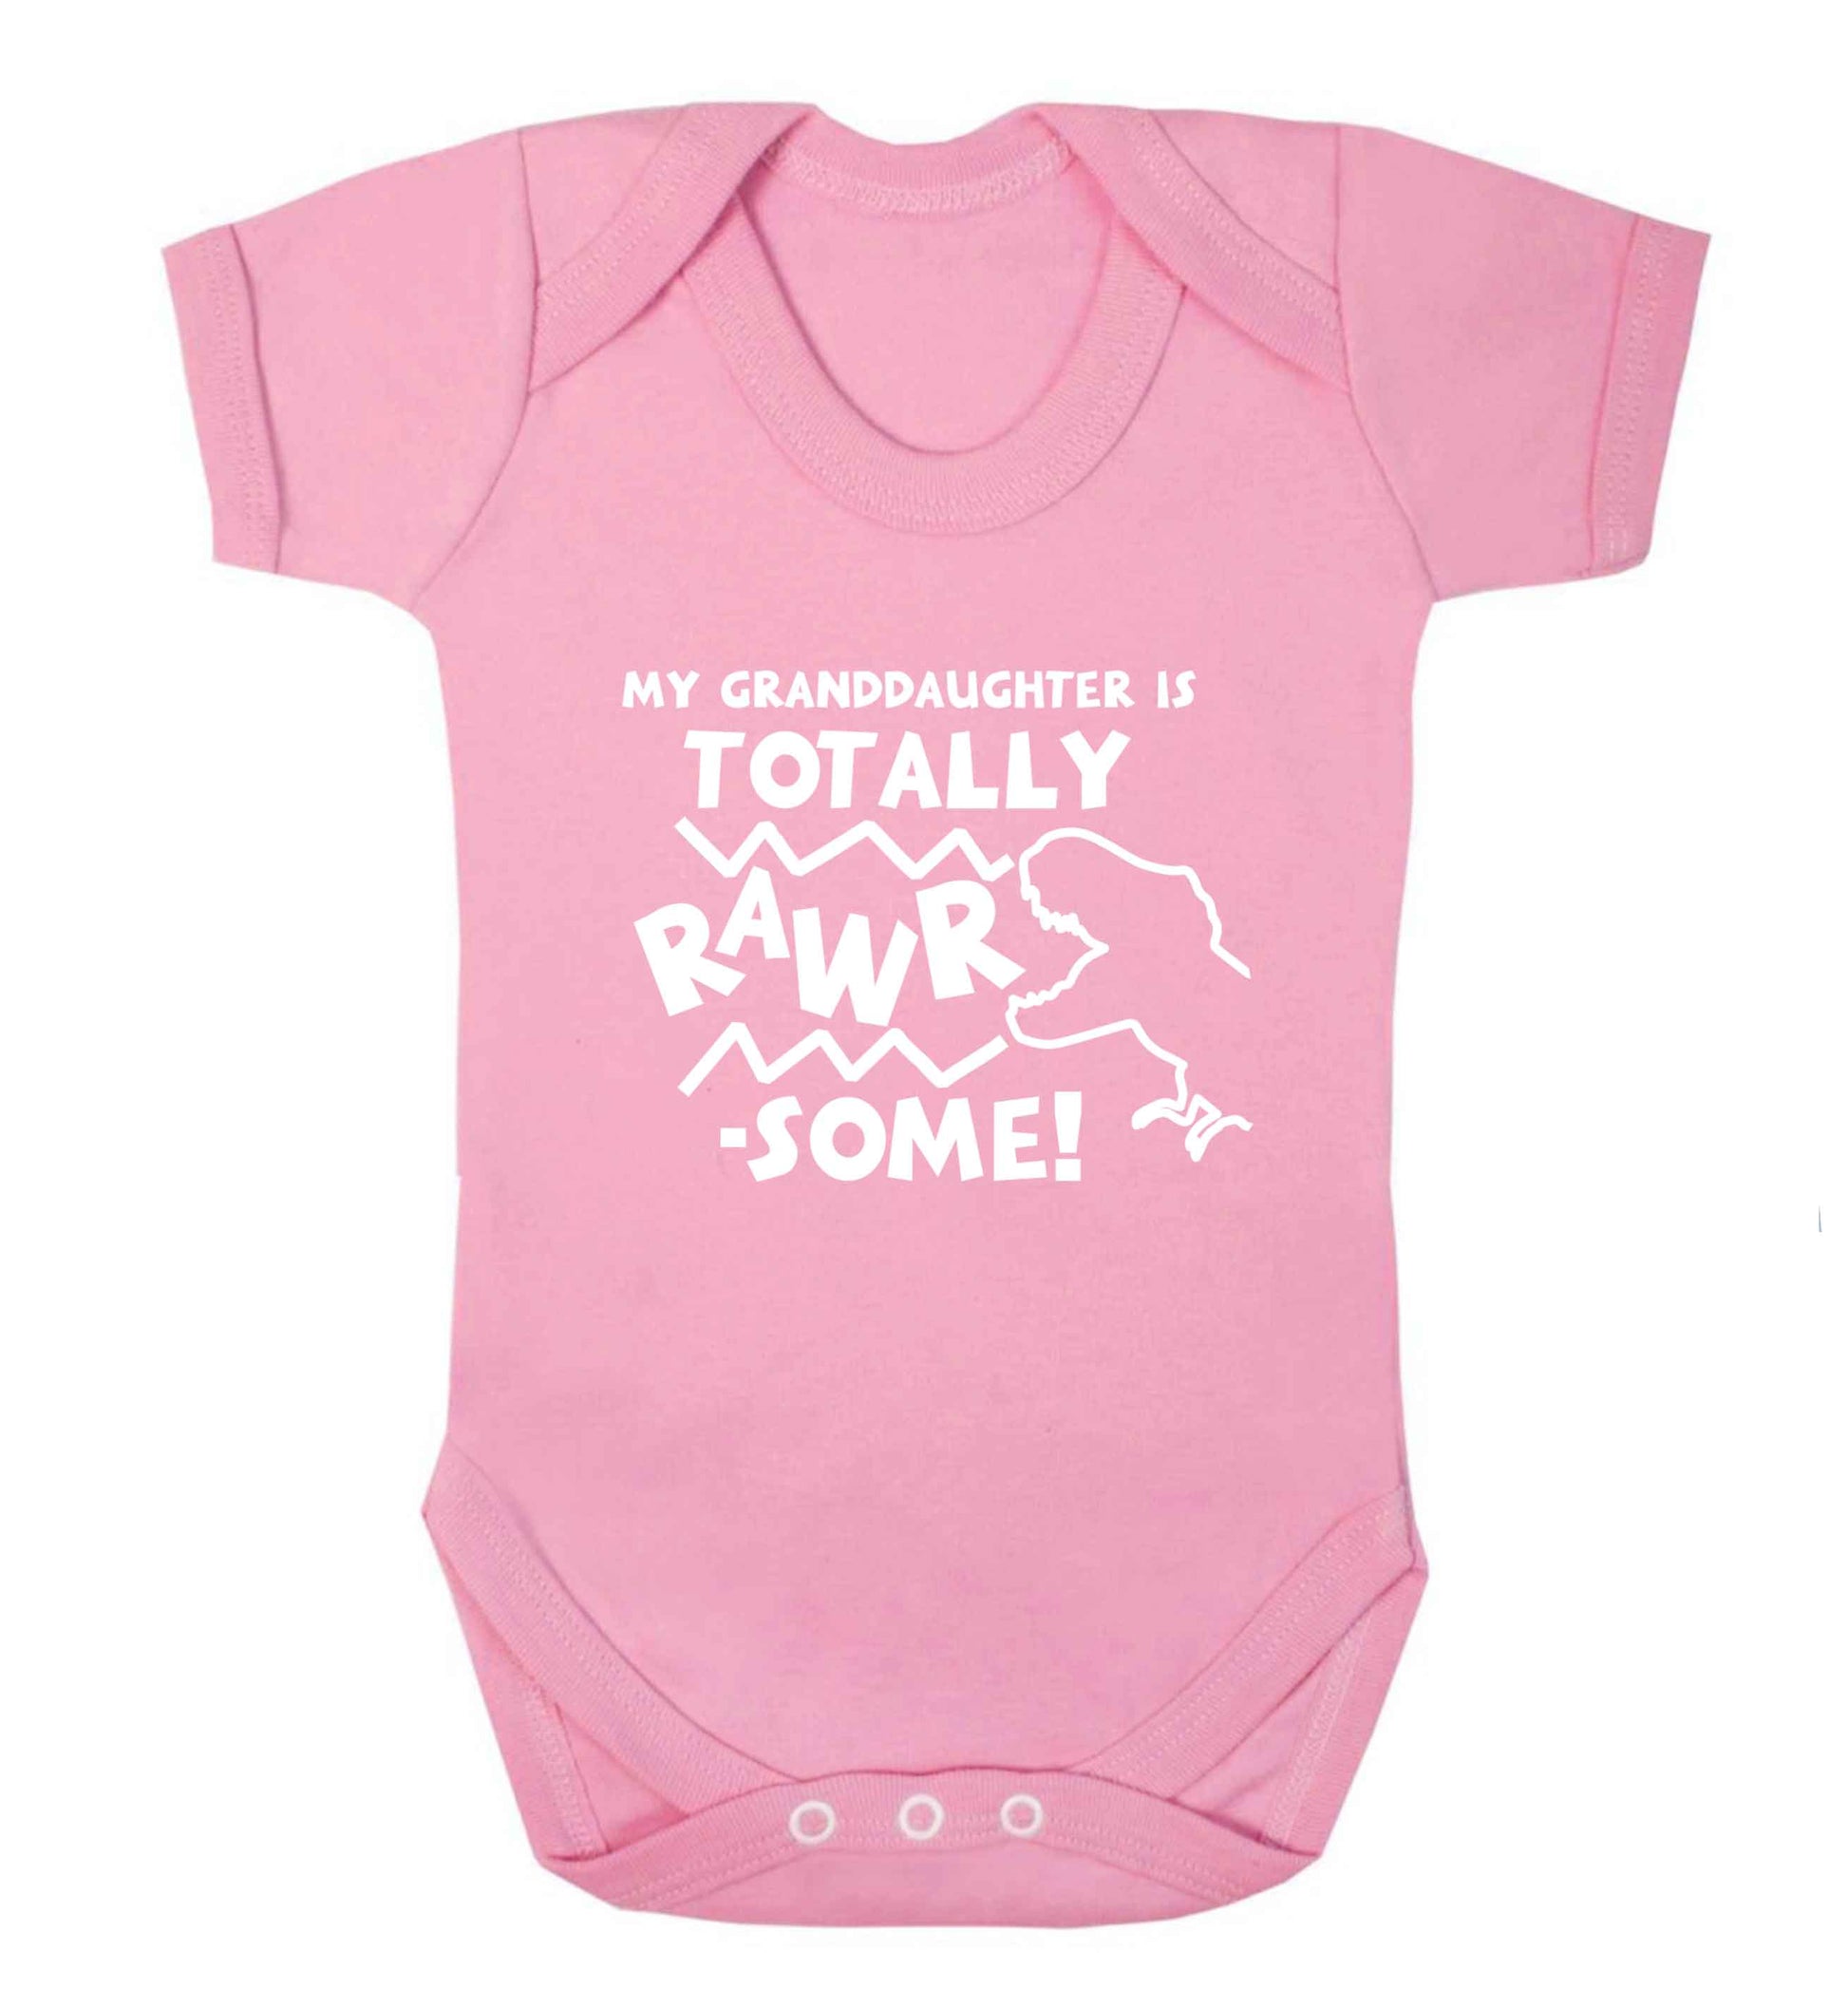 My granddaughter is totally rawrsome baby vest pale pink 18-24 months